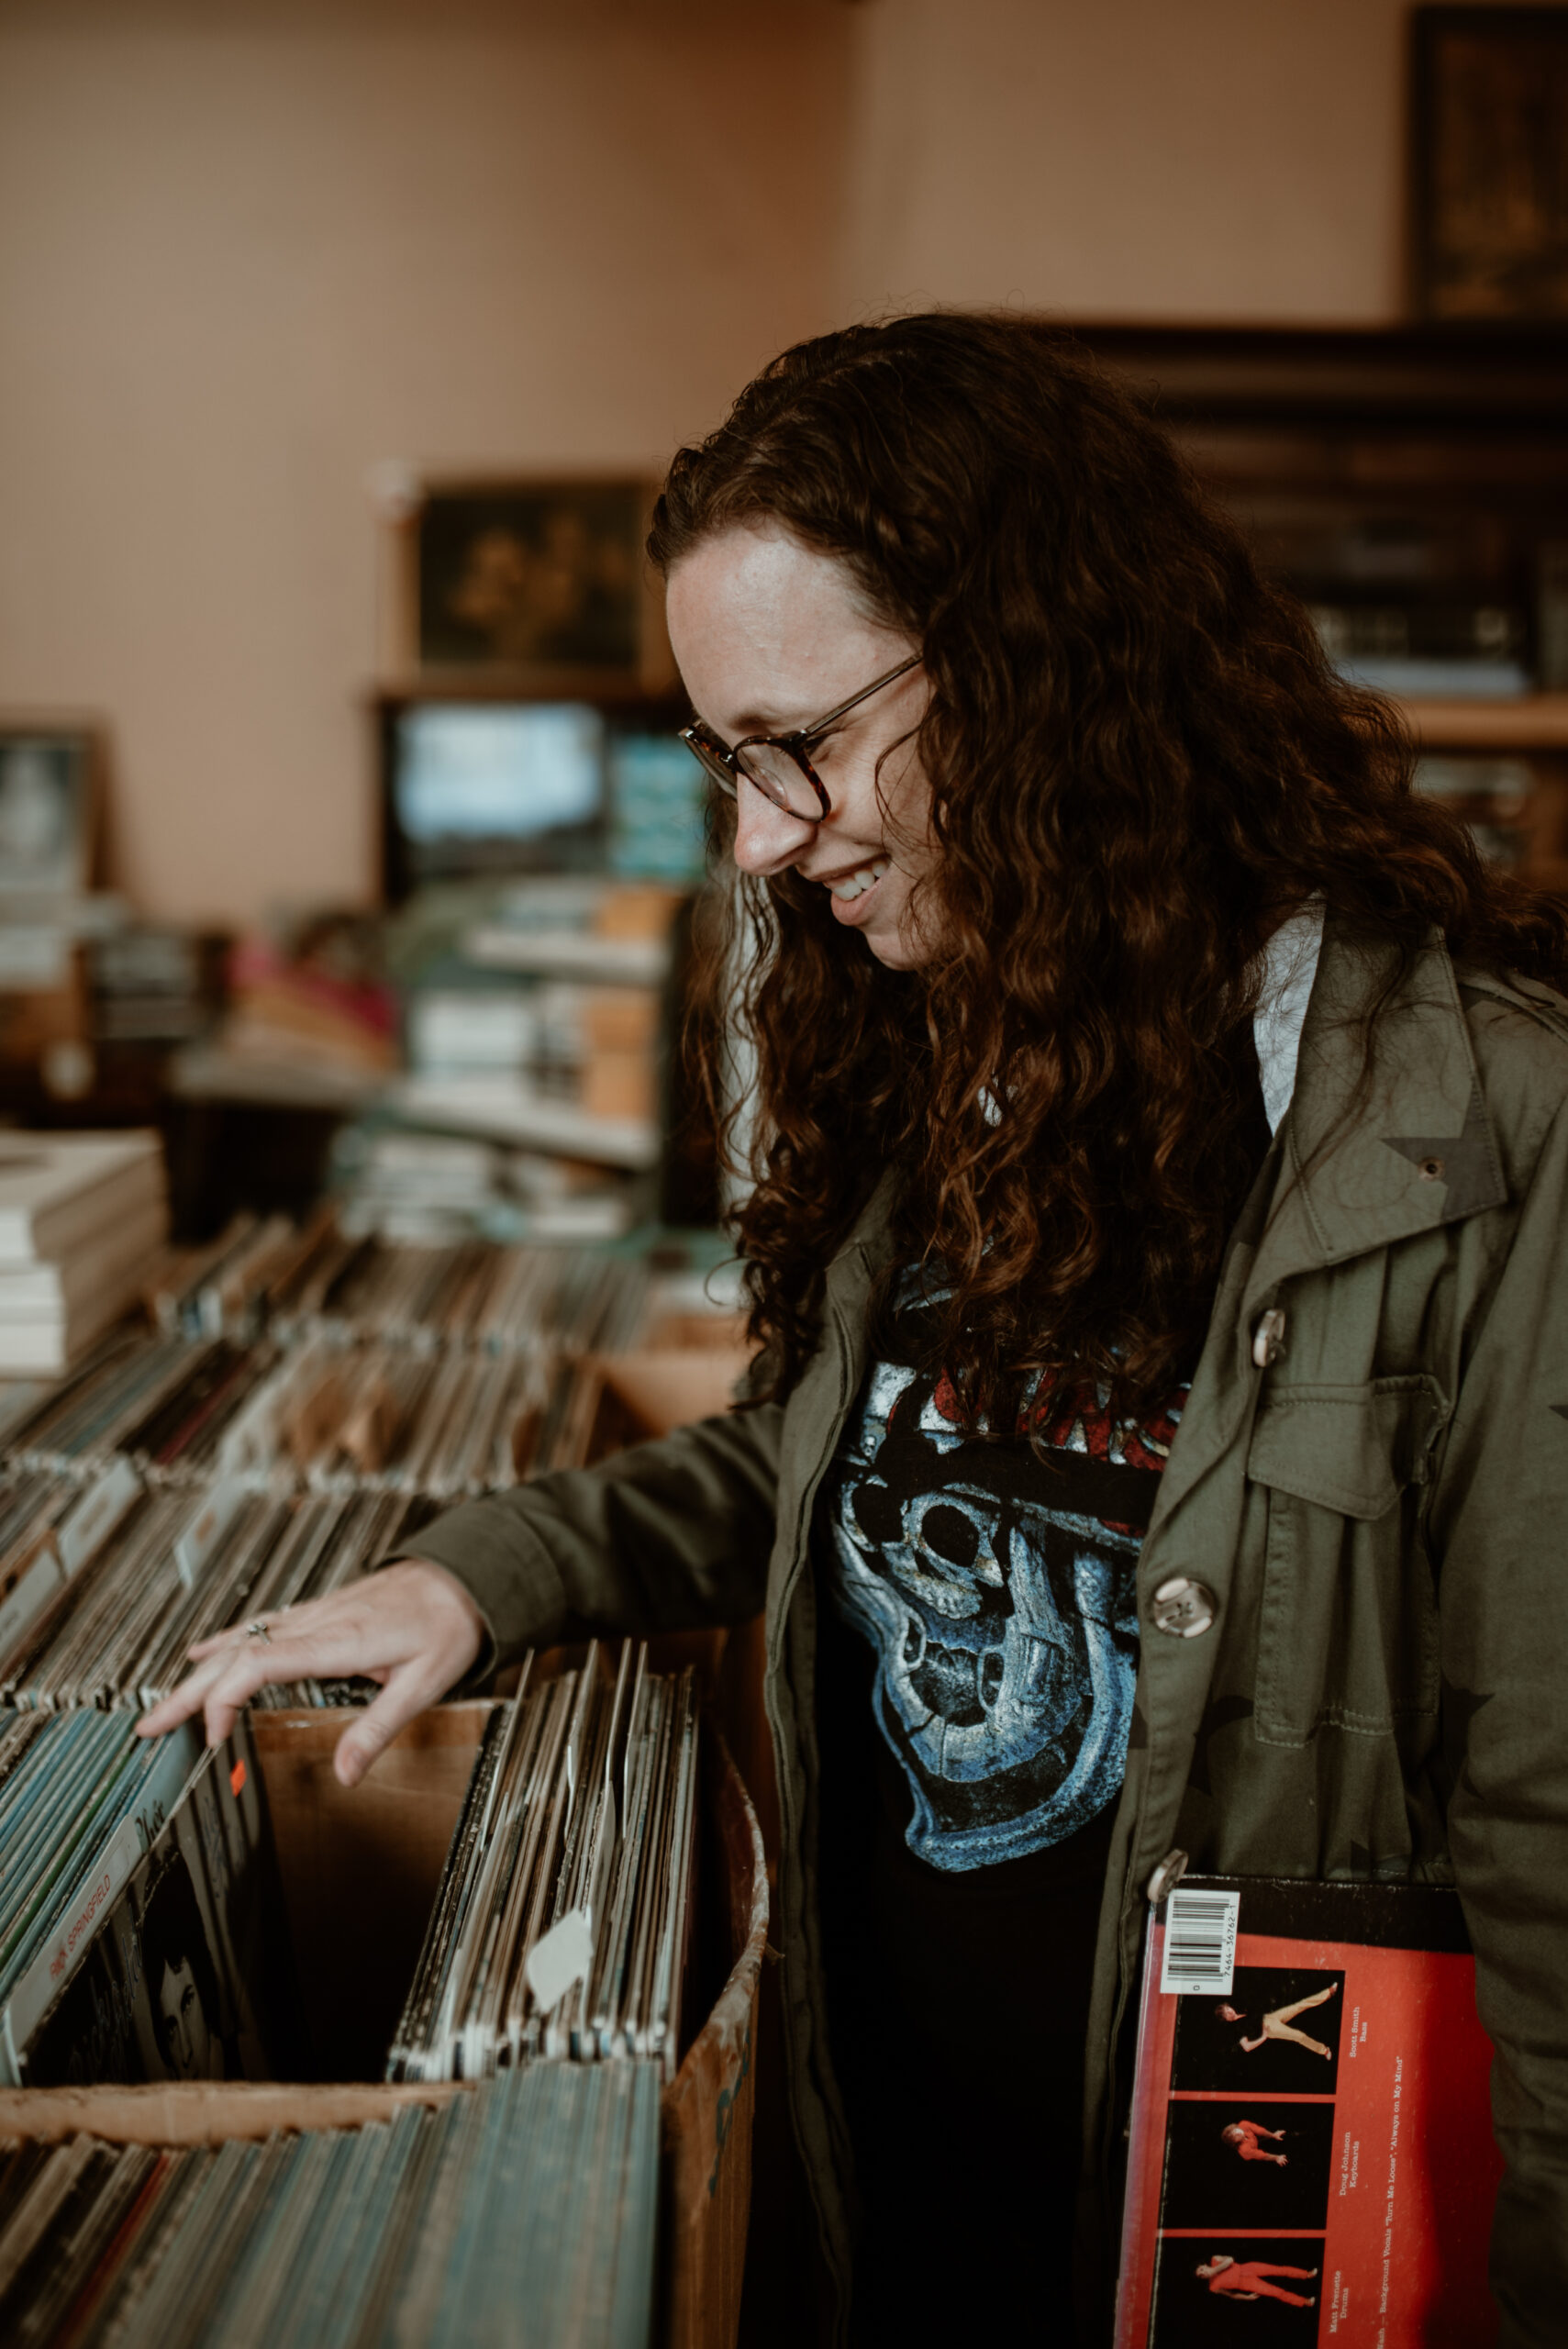 Photographer Shonda Michelson looking through vinyl records at a thrift store.